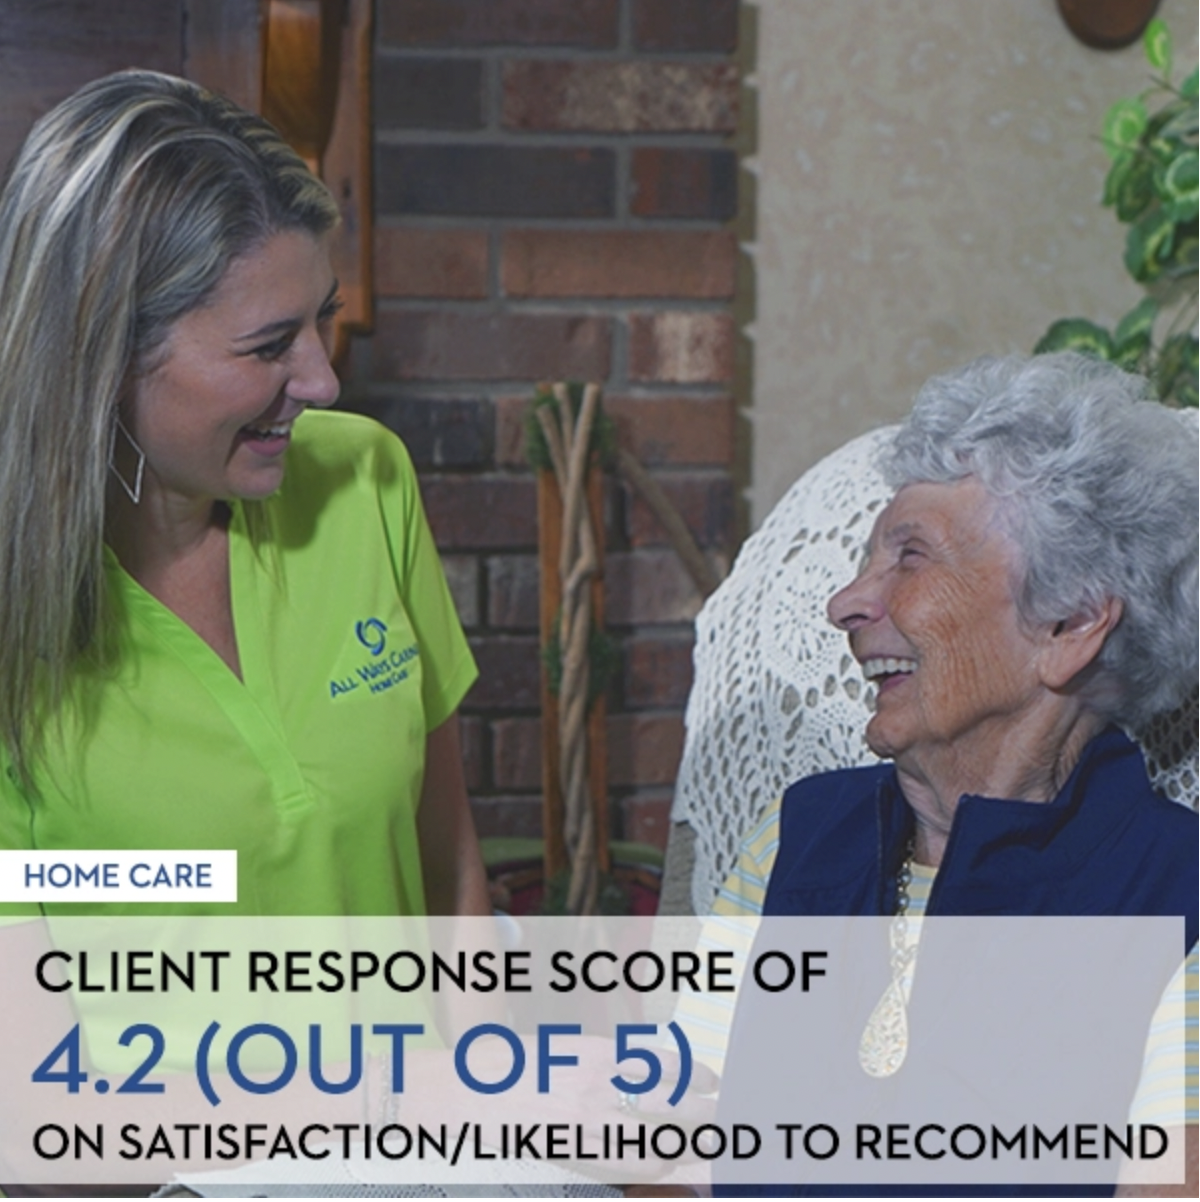 Home Care - Client response score of 4.2 out of 5 on satisfaction and likelihood to recommend